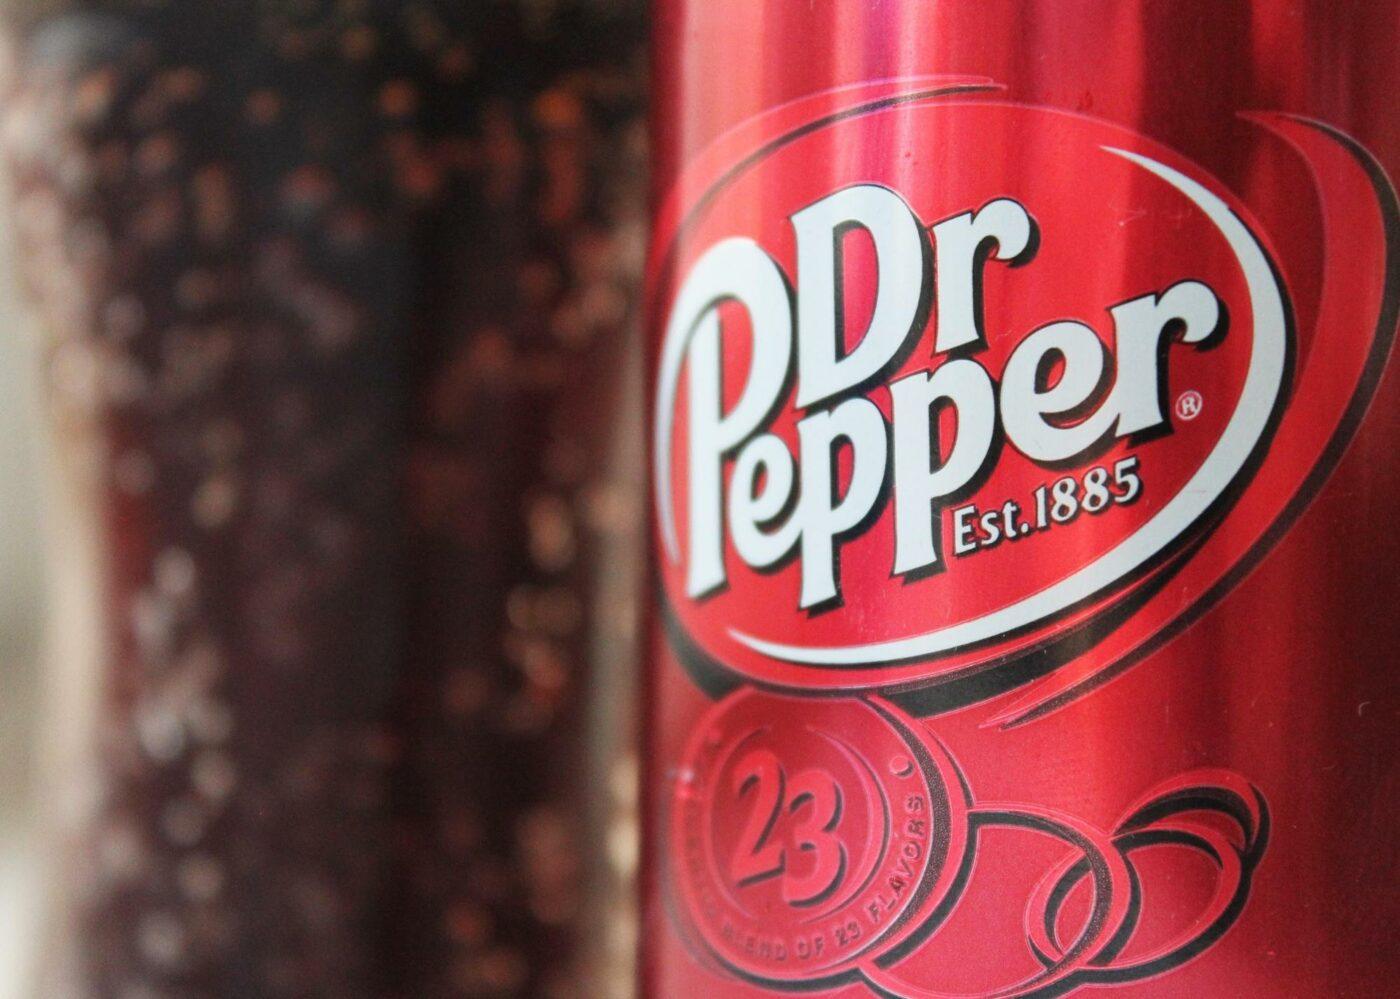 A can of Dr. Pepper soda